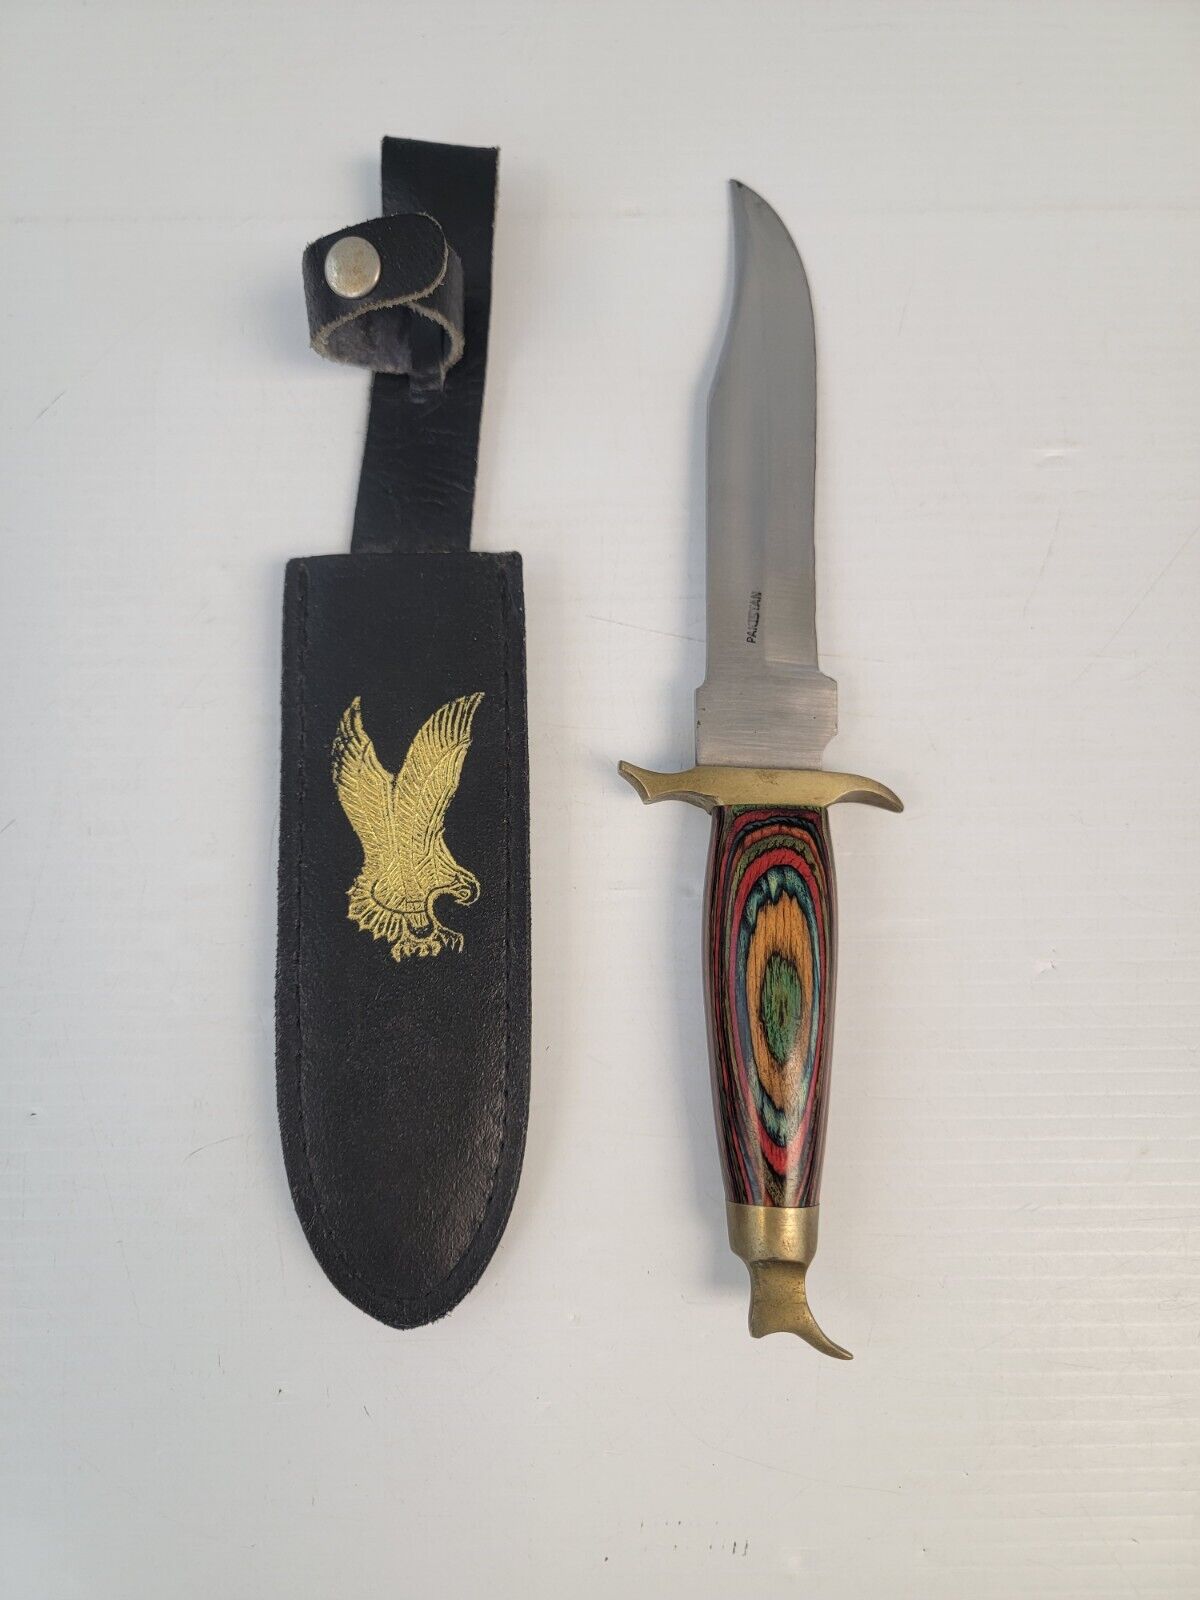 RARE / VINTAGE / PAKISTAN STAINLESS HUNTING KNIFE / UNIQUE BRASS SWIRLED HANDLE